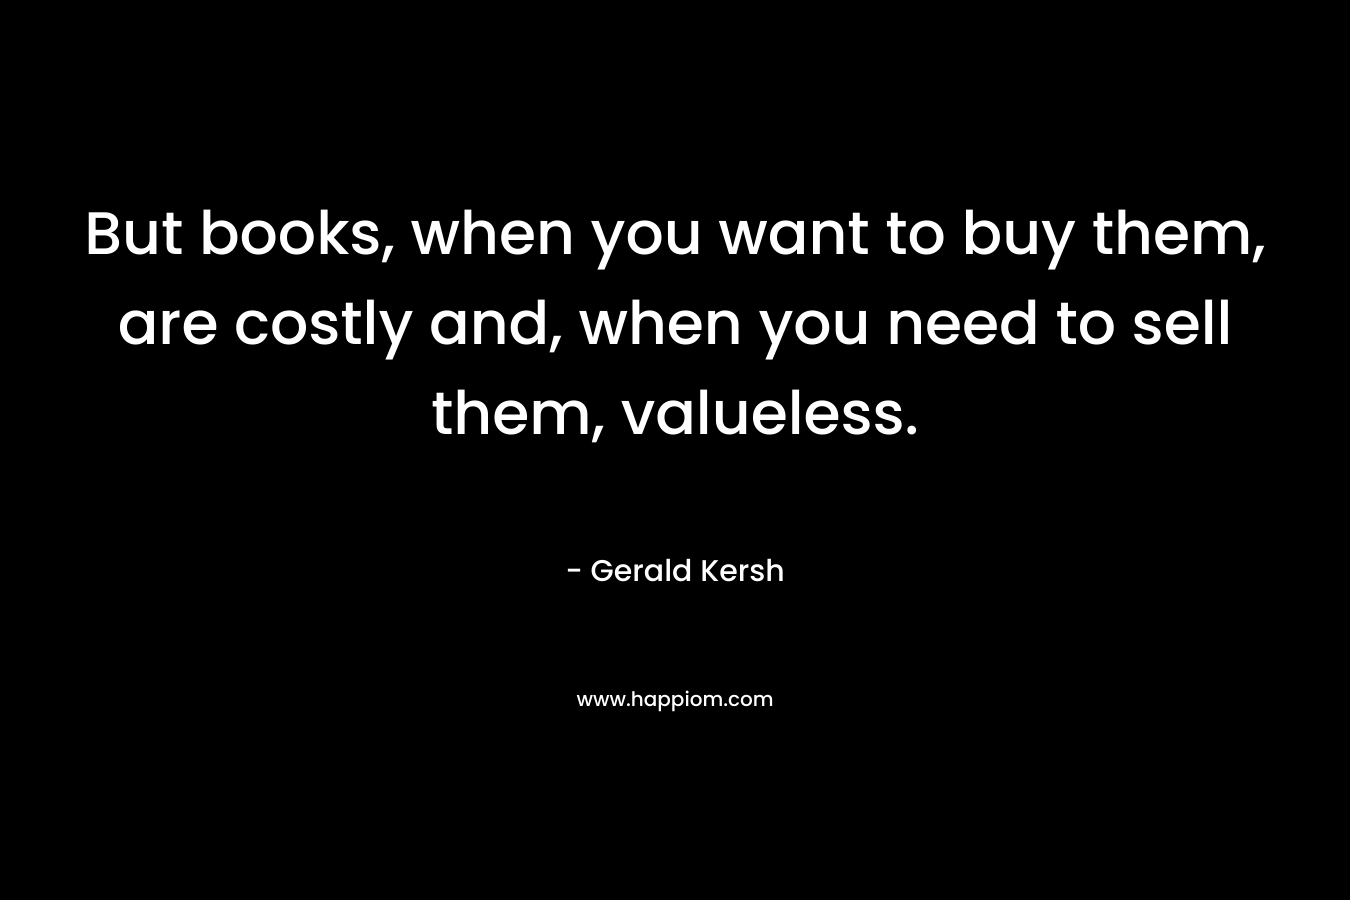 But books, when you want to buy them, are costly and, when you need to sell them, valueless. – Gerald Kersh